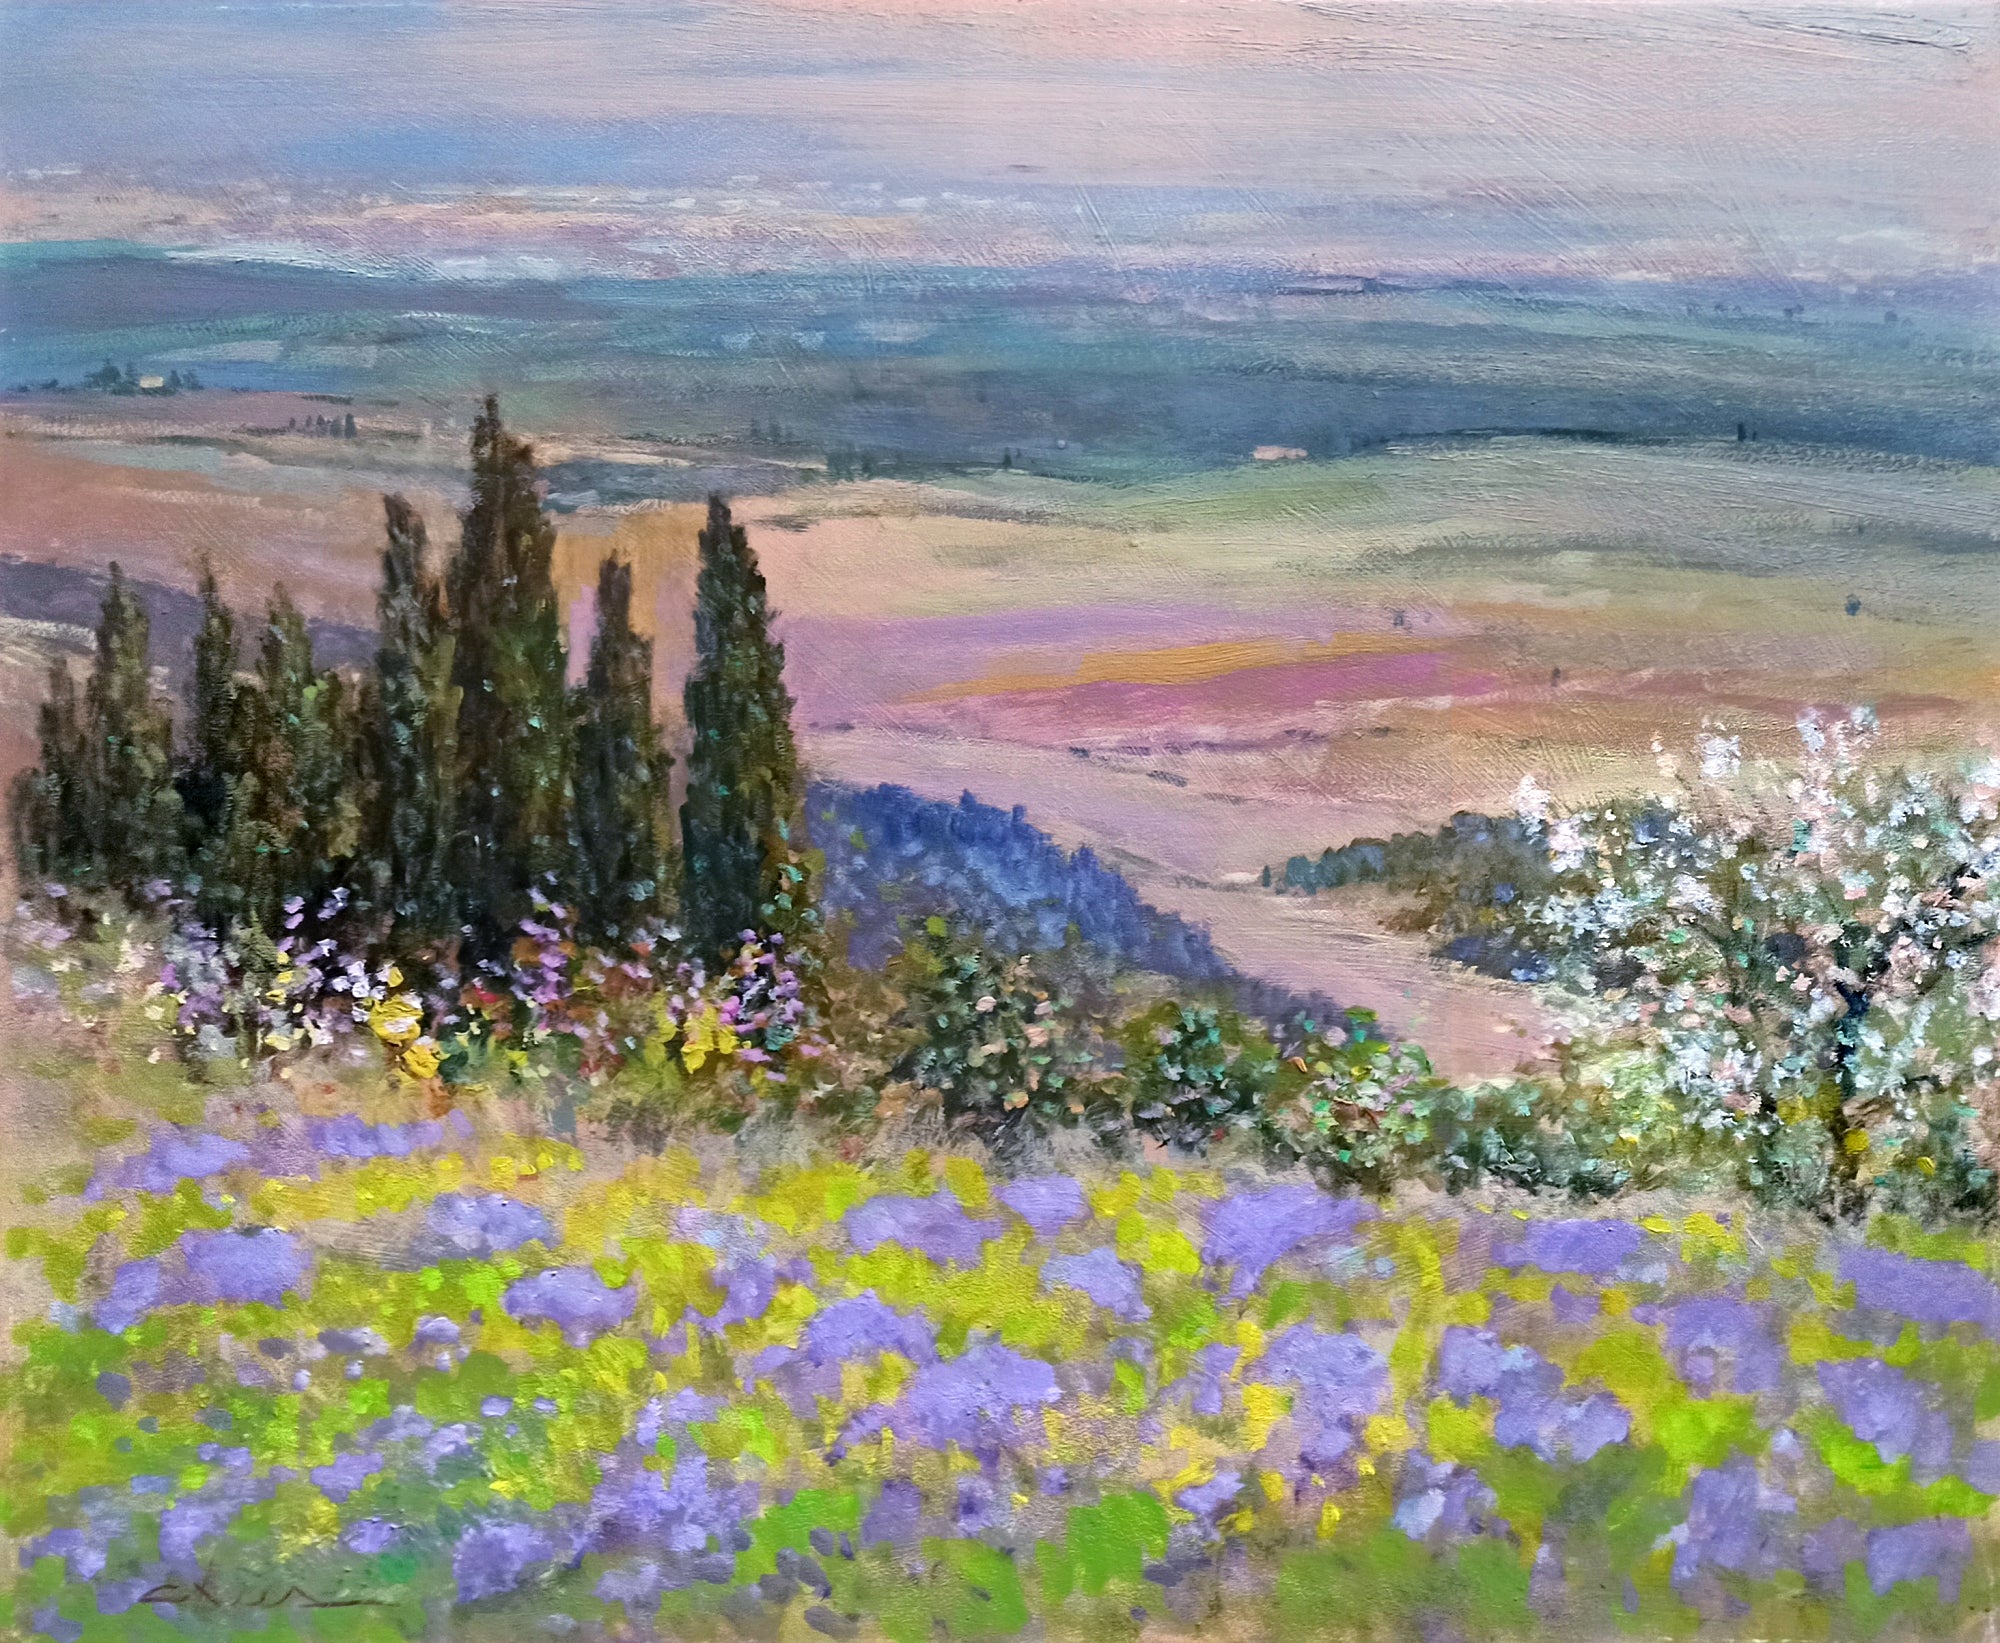 Tuscany painting by Biagio Chiesi painter 